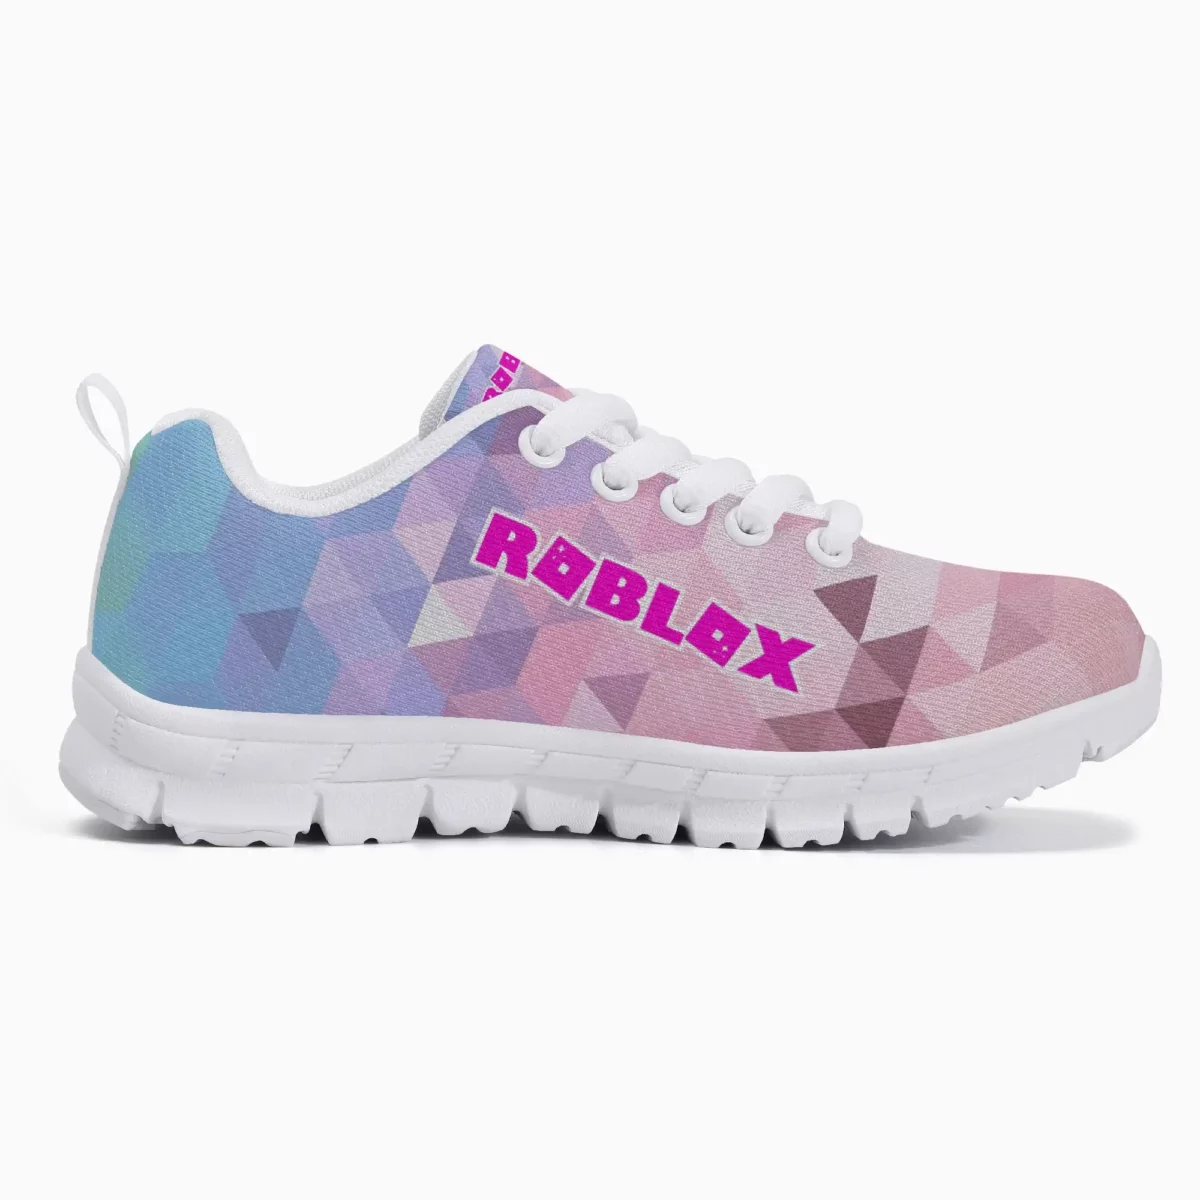 Roblox Girls Personalized Lightweight Mesh Sneakers Inspired by Roblox Girl Video Games Cool Kiddo 22